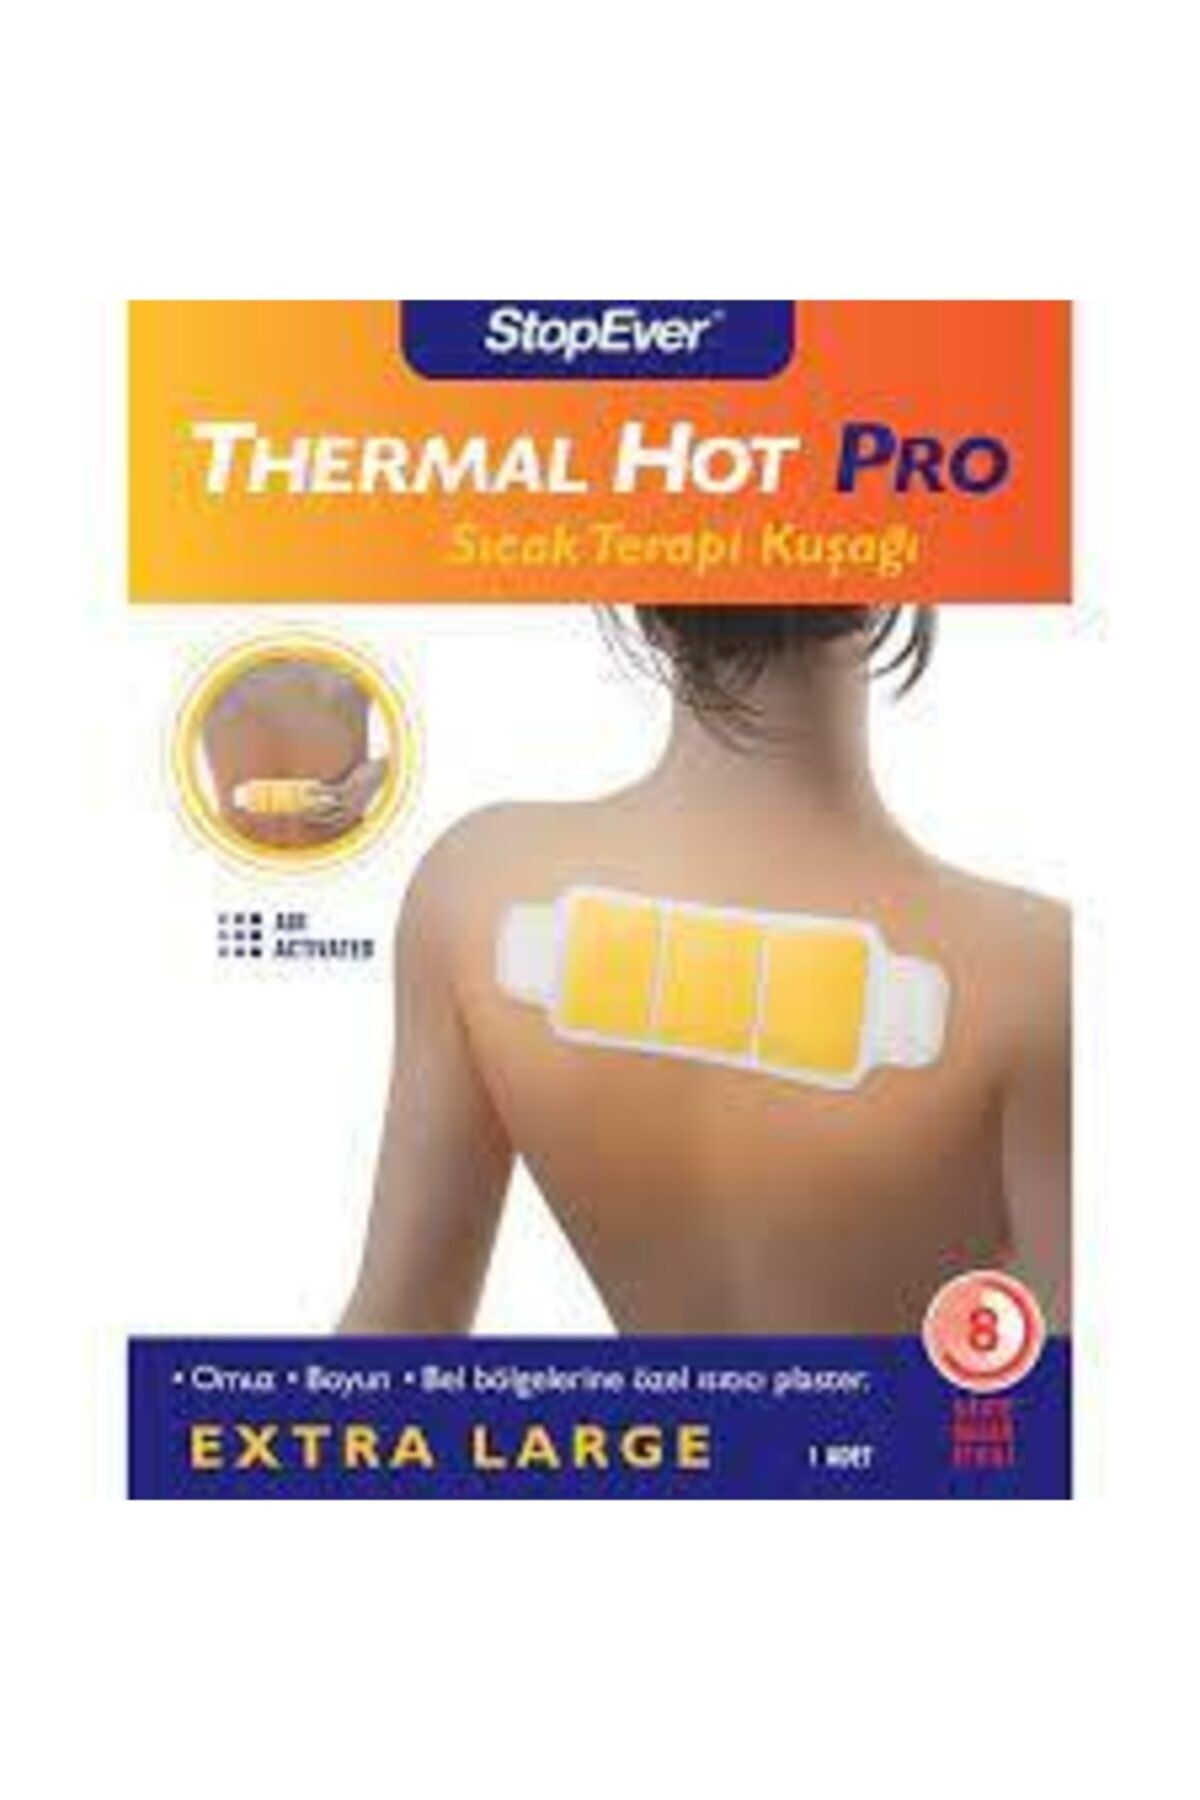 StopEver Stop Ever Thermal Hot Pro